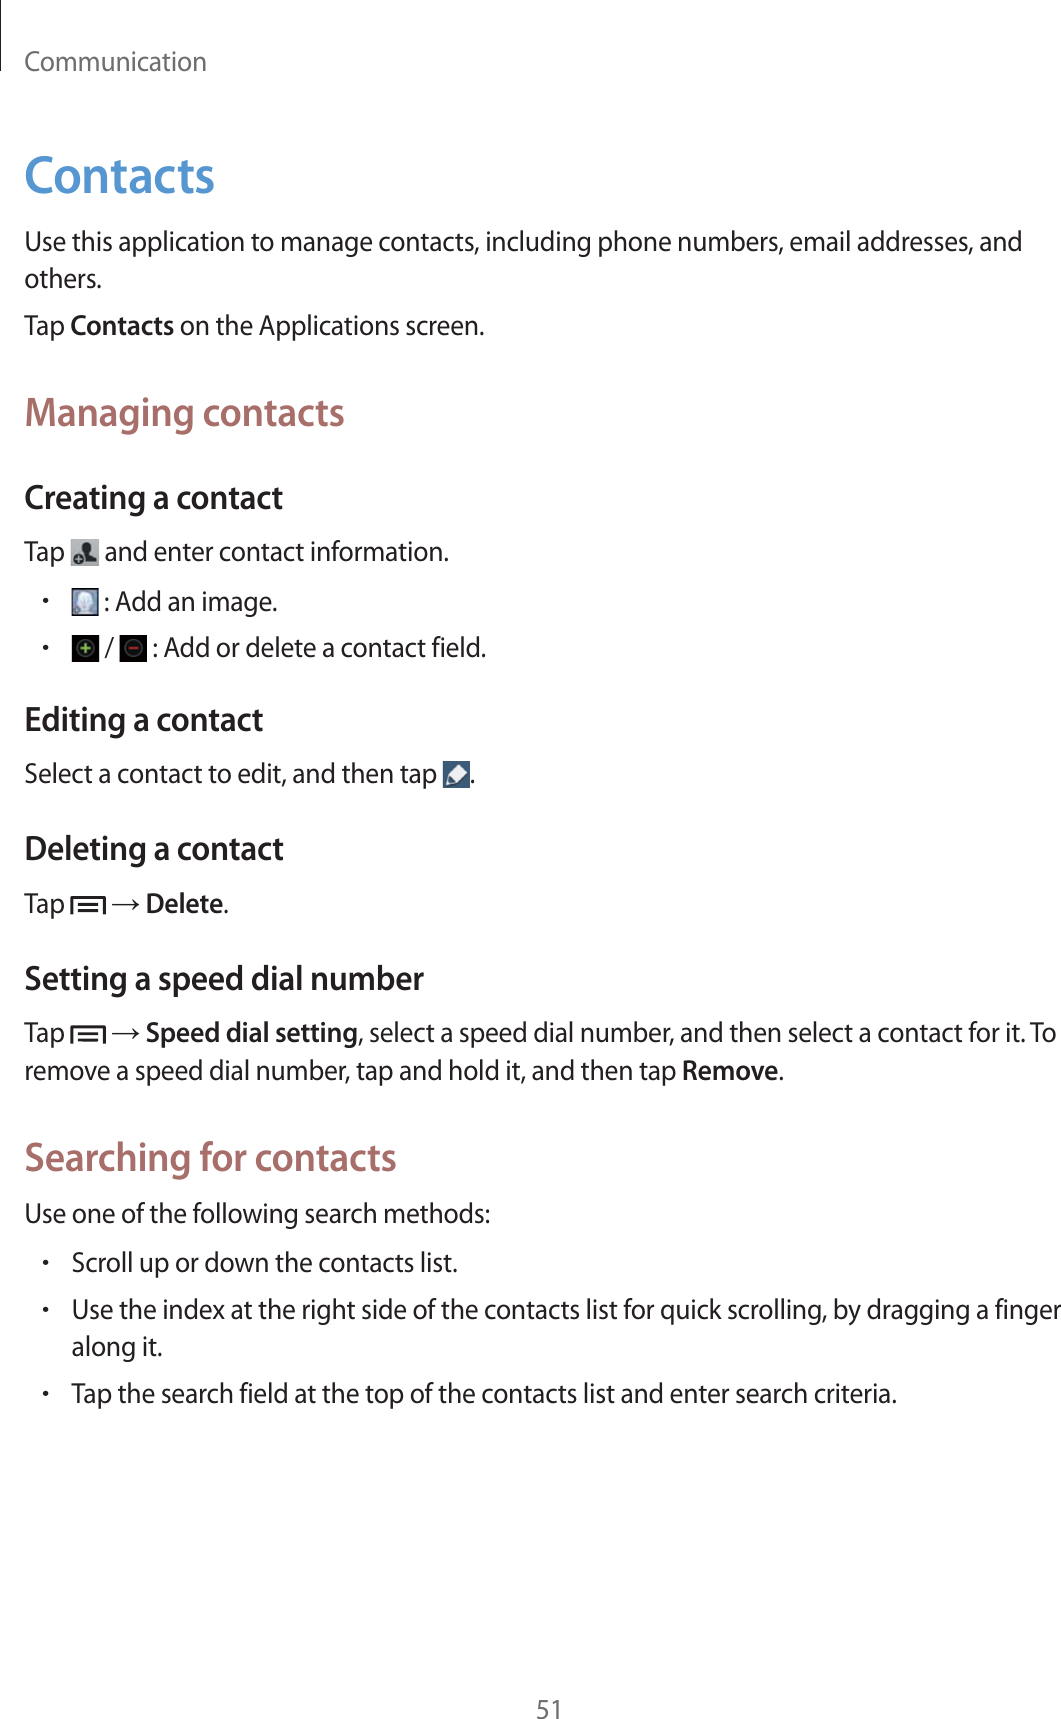 Communication51ContactsUse this application to manage contacts, including phone numbers, email addresses, and others.Tap Contacts on the Applications screen.Managing contactsCreating a contactTap   and enter contact information.r : Add an image.r /   : Add or delete a contact field.Editing a contactSelect a contact to edit, and then tap  .Deleting a contactTap    Delete.Setting a speed dial numberTap    Speed dial setting, select a speed dial number, and then select a contact for it. To remove a speed dial number, tap and hold it, and then tap Remove.Searching for contactsUse one of the following search methods:rScroll up or down the contacts list.rUse the index at the right side of the contacts list for quick scrolling, by dragging a finger along it.rTap the search field at the top of the contacts list and enter search criteria.